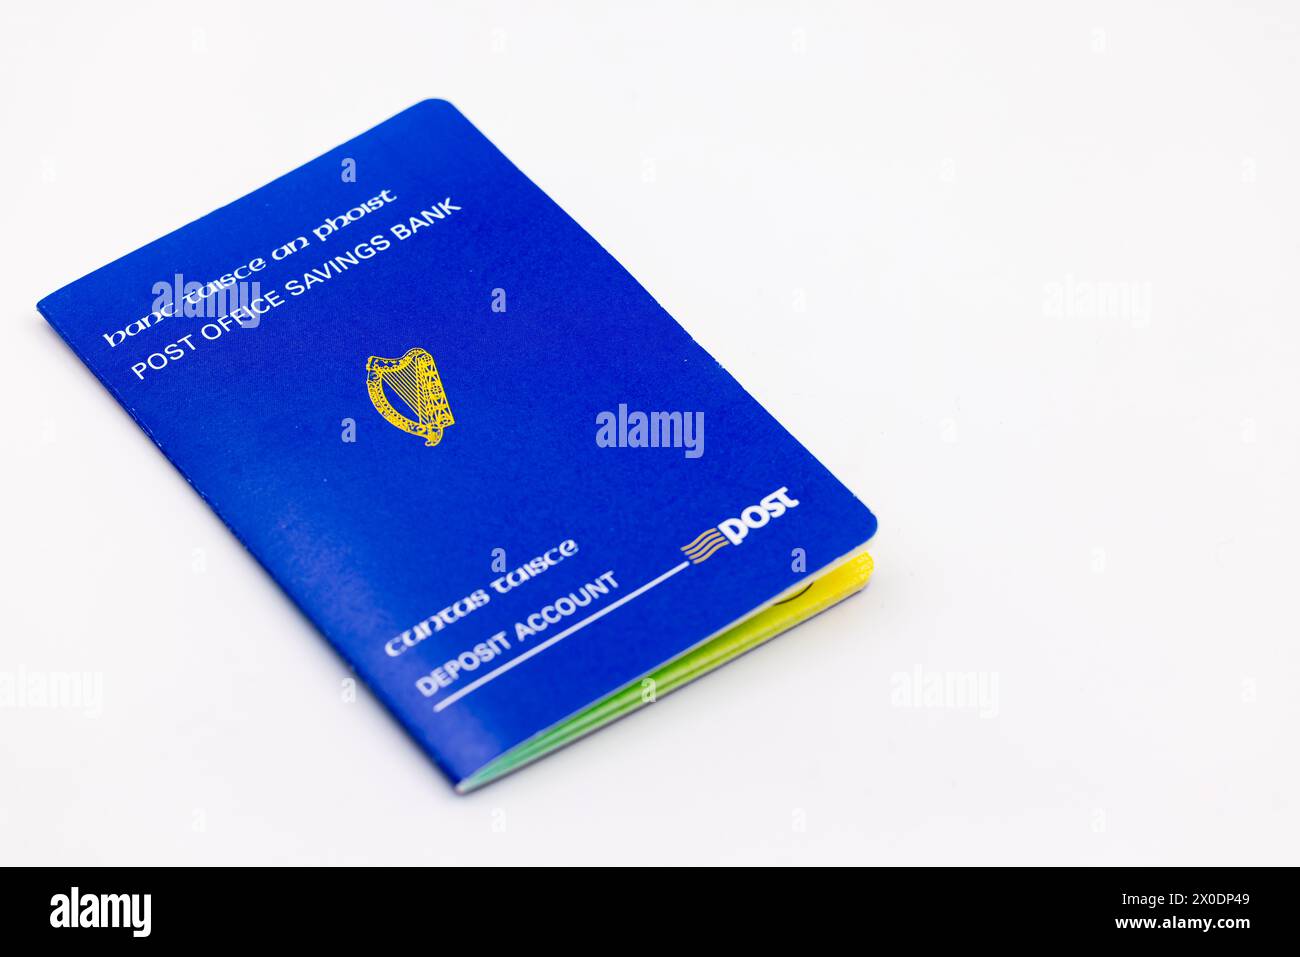 Post Office Savings Bank deposit book issued by 'An Post', Irish state owned banking service provider. Monetary record keeping document. Ireland Stock Photo